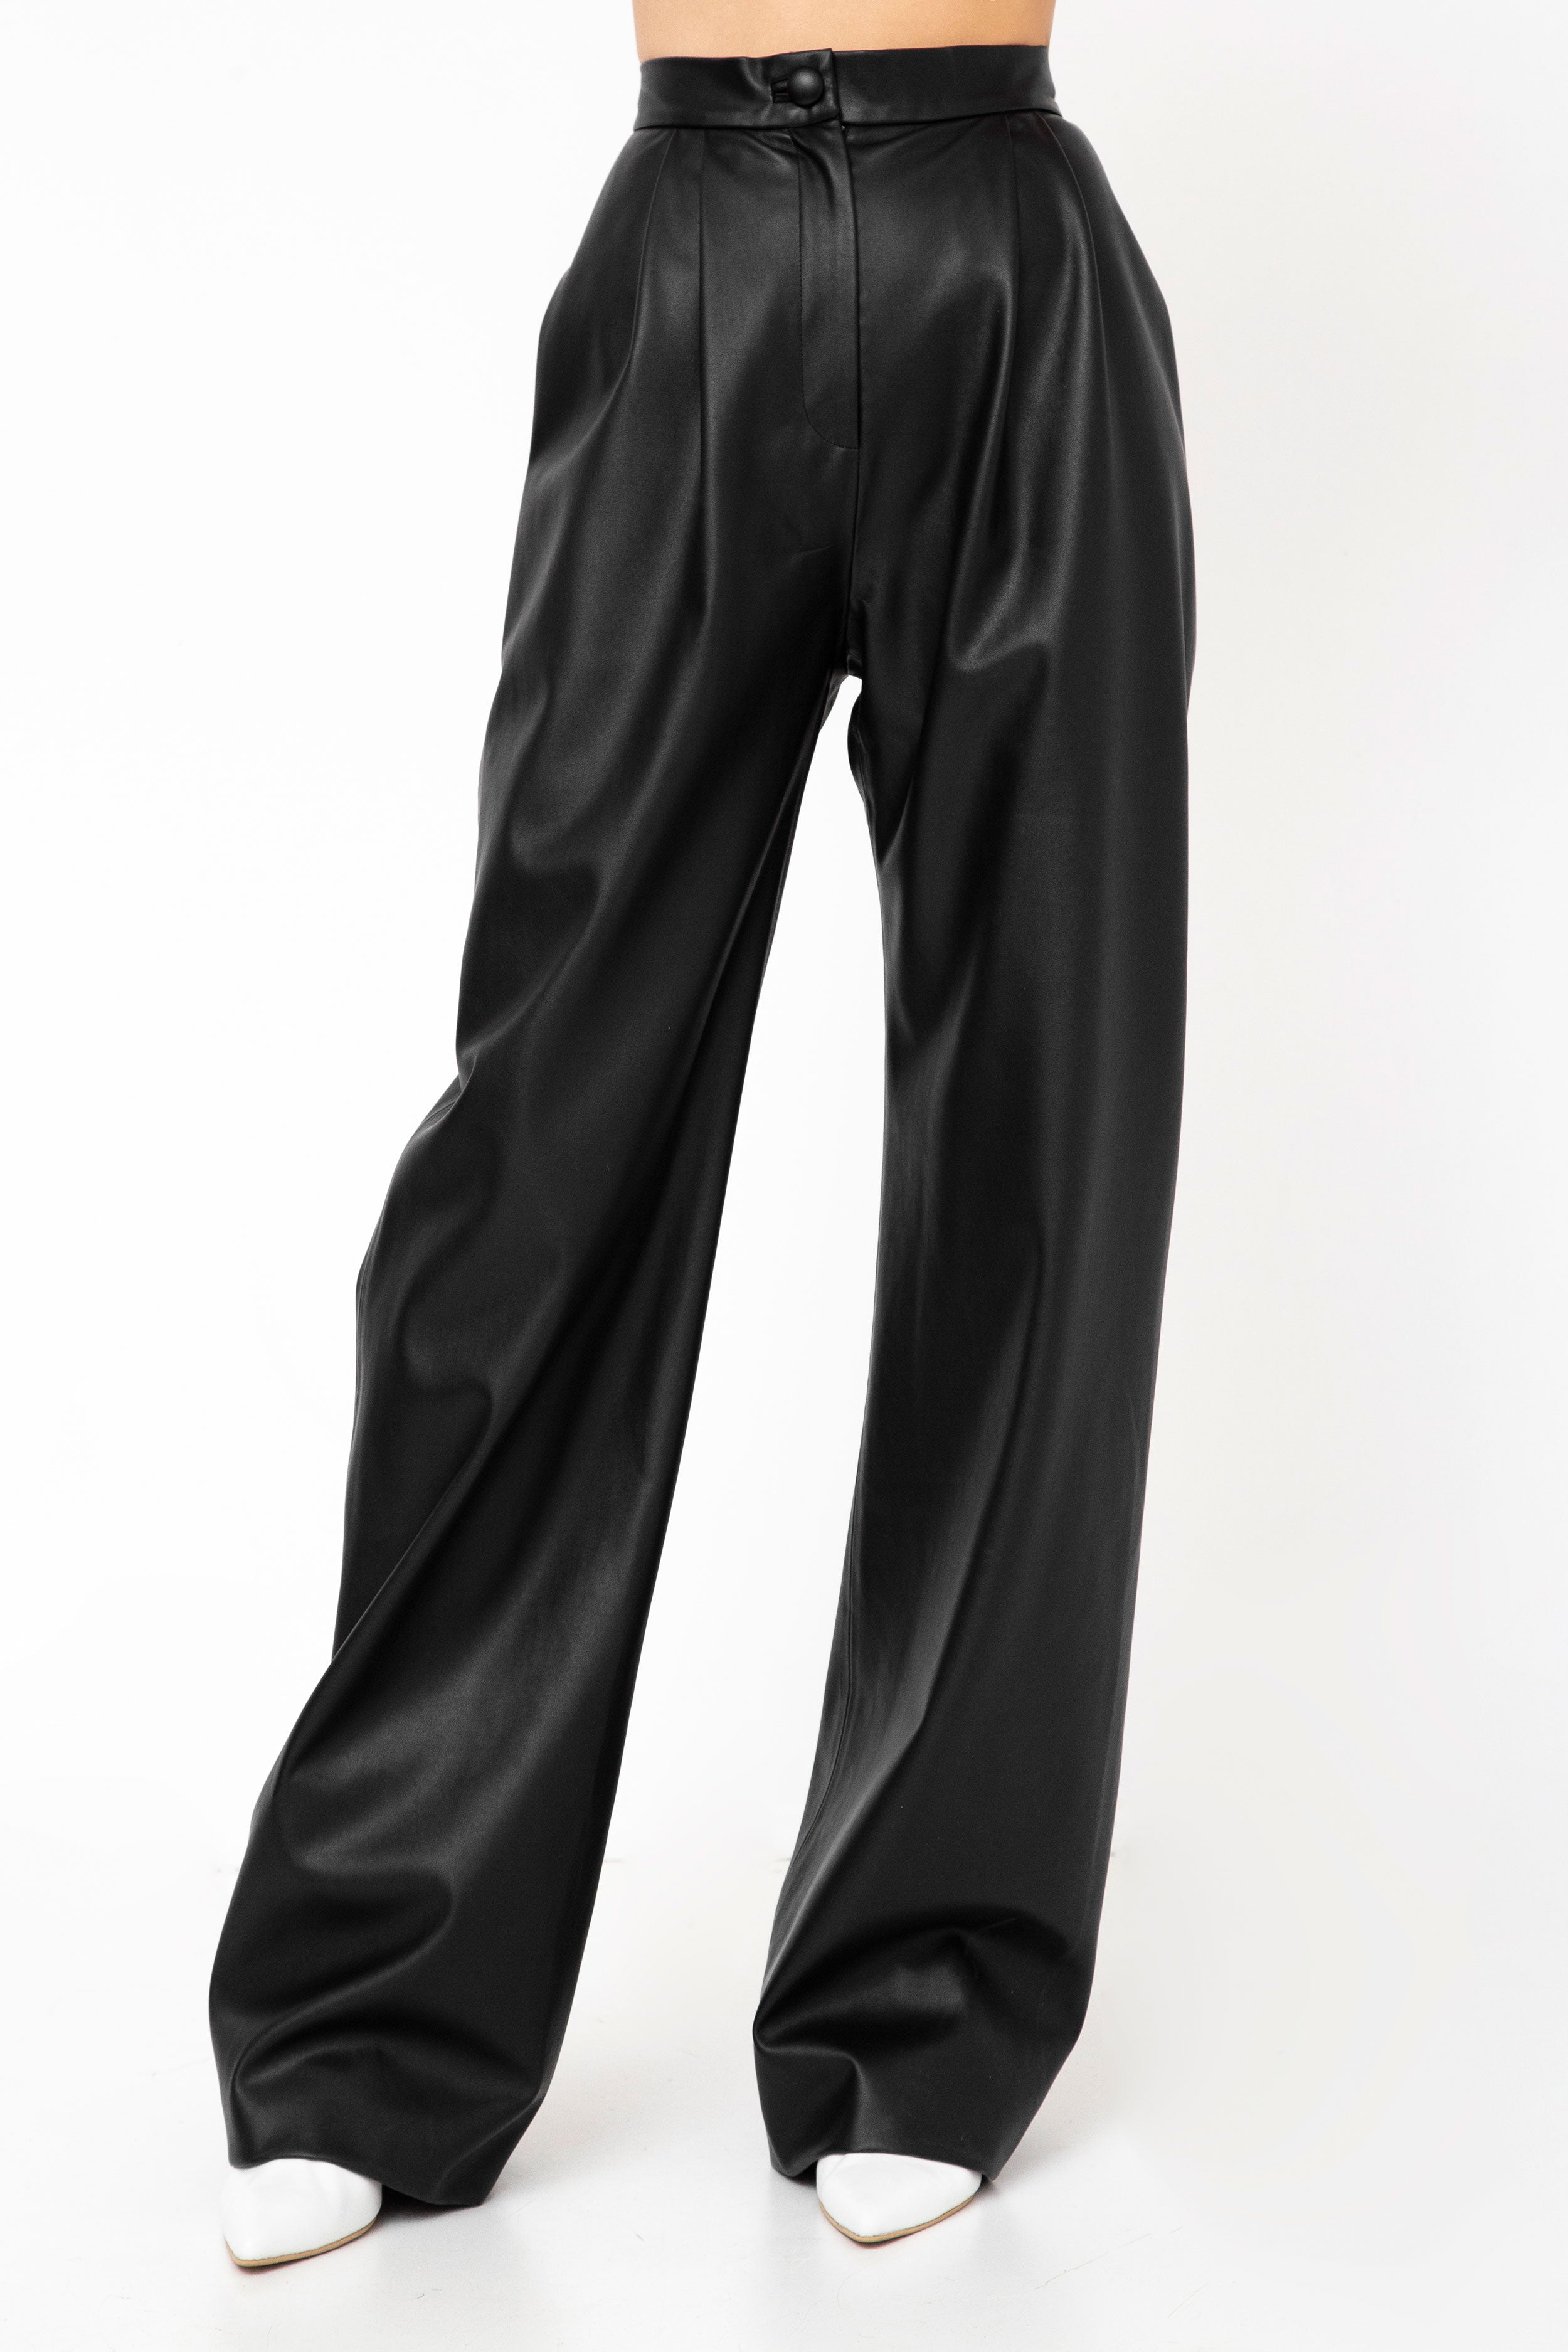 high waisted black faux leather pants